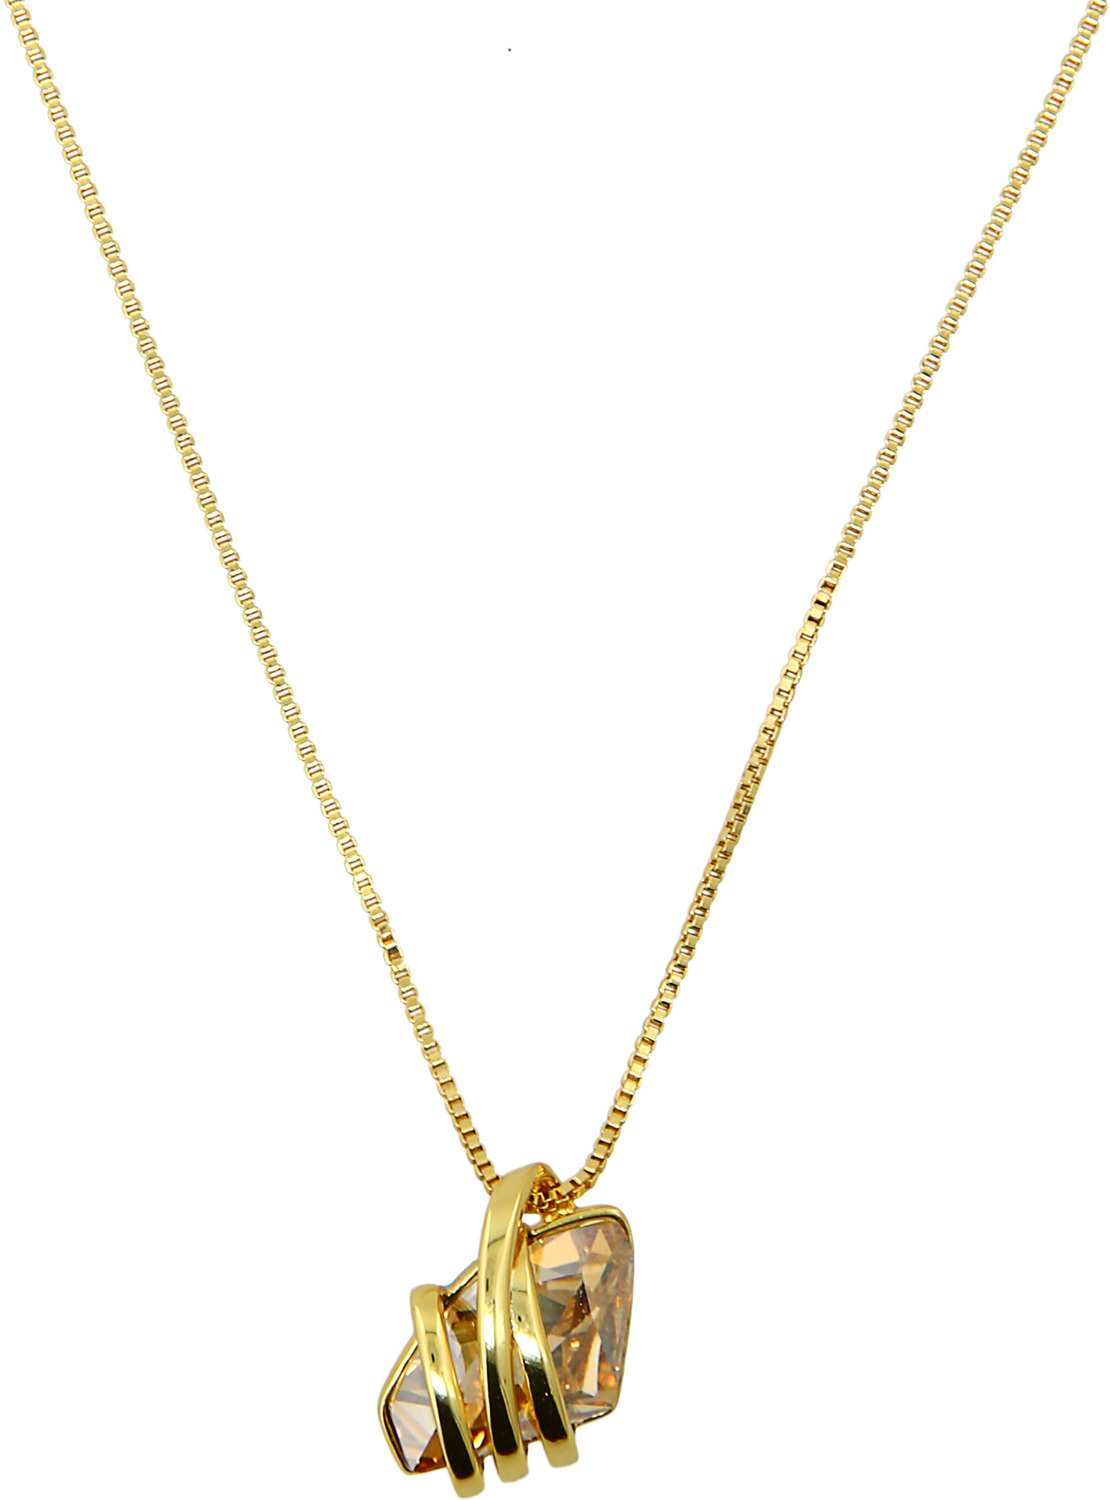 Crystal Golden Shadow Galactic by H2Z Made with Swarovski Elements - Crystal Golden Shadow Galactic - Gold Plated Austrian Element Necklace